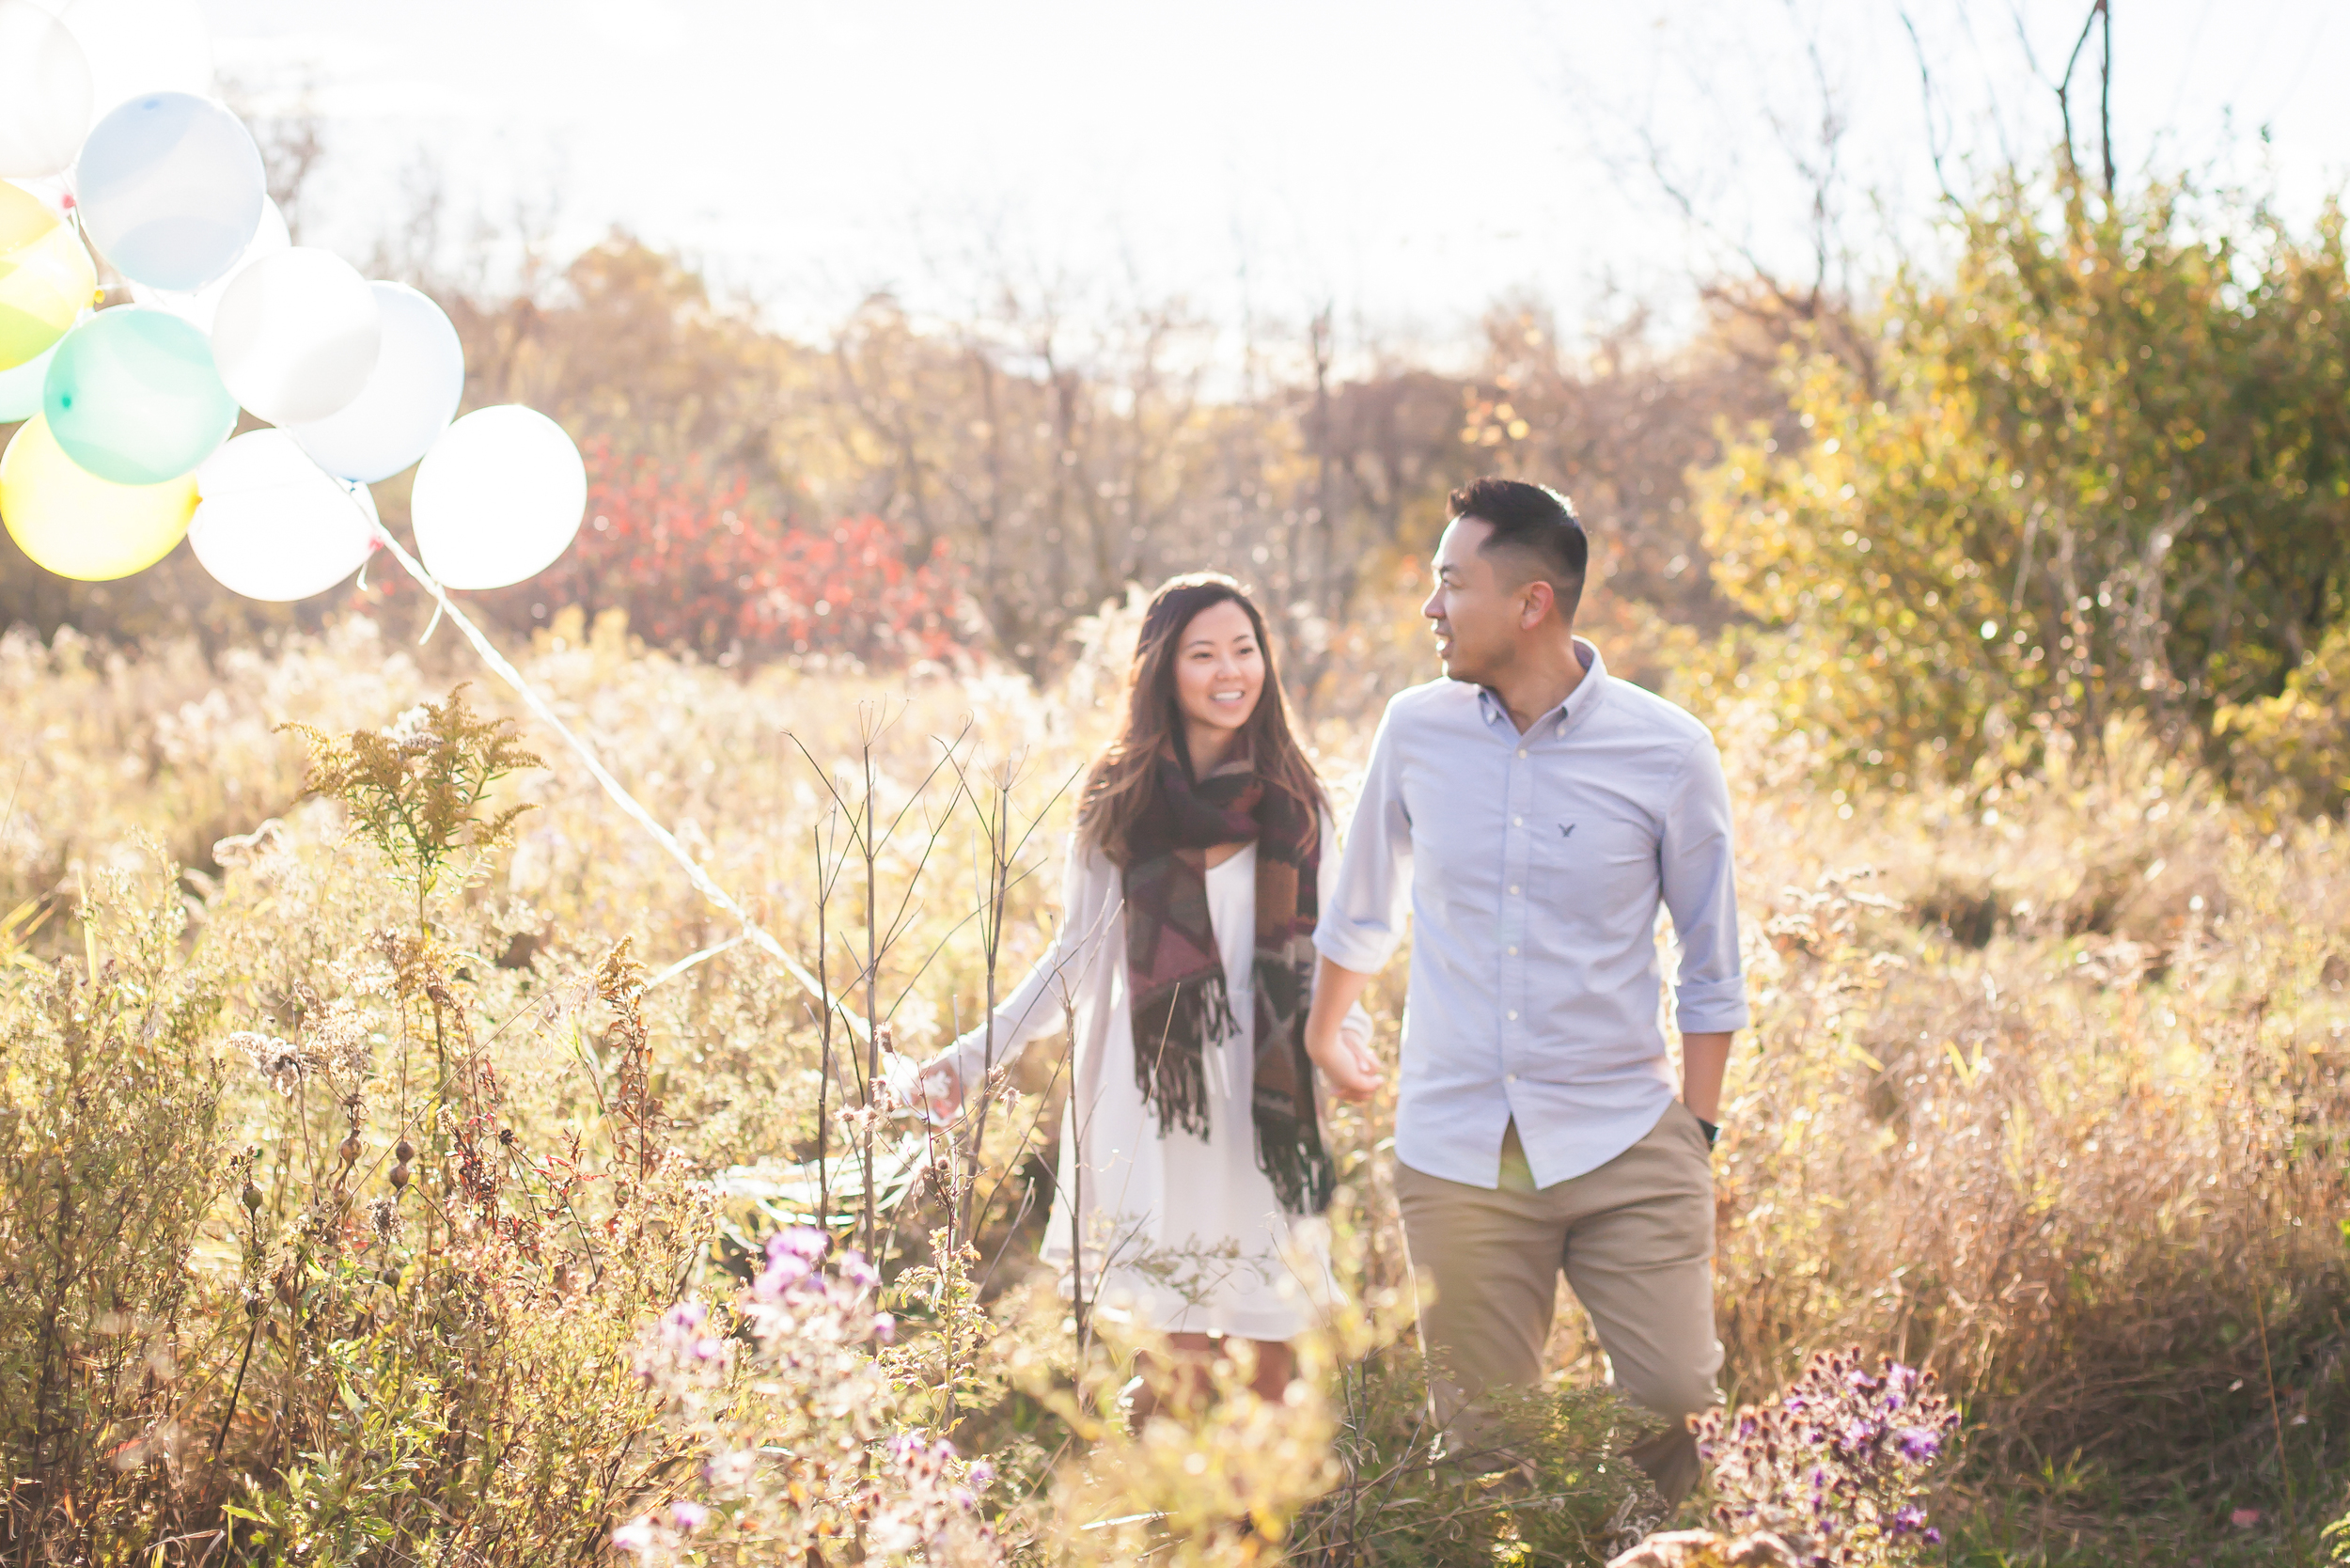 Outdoor engagement session on a field with pastel balloons